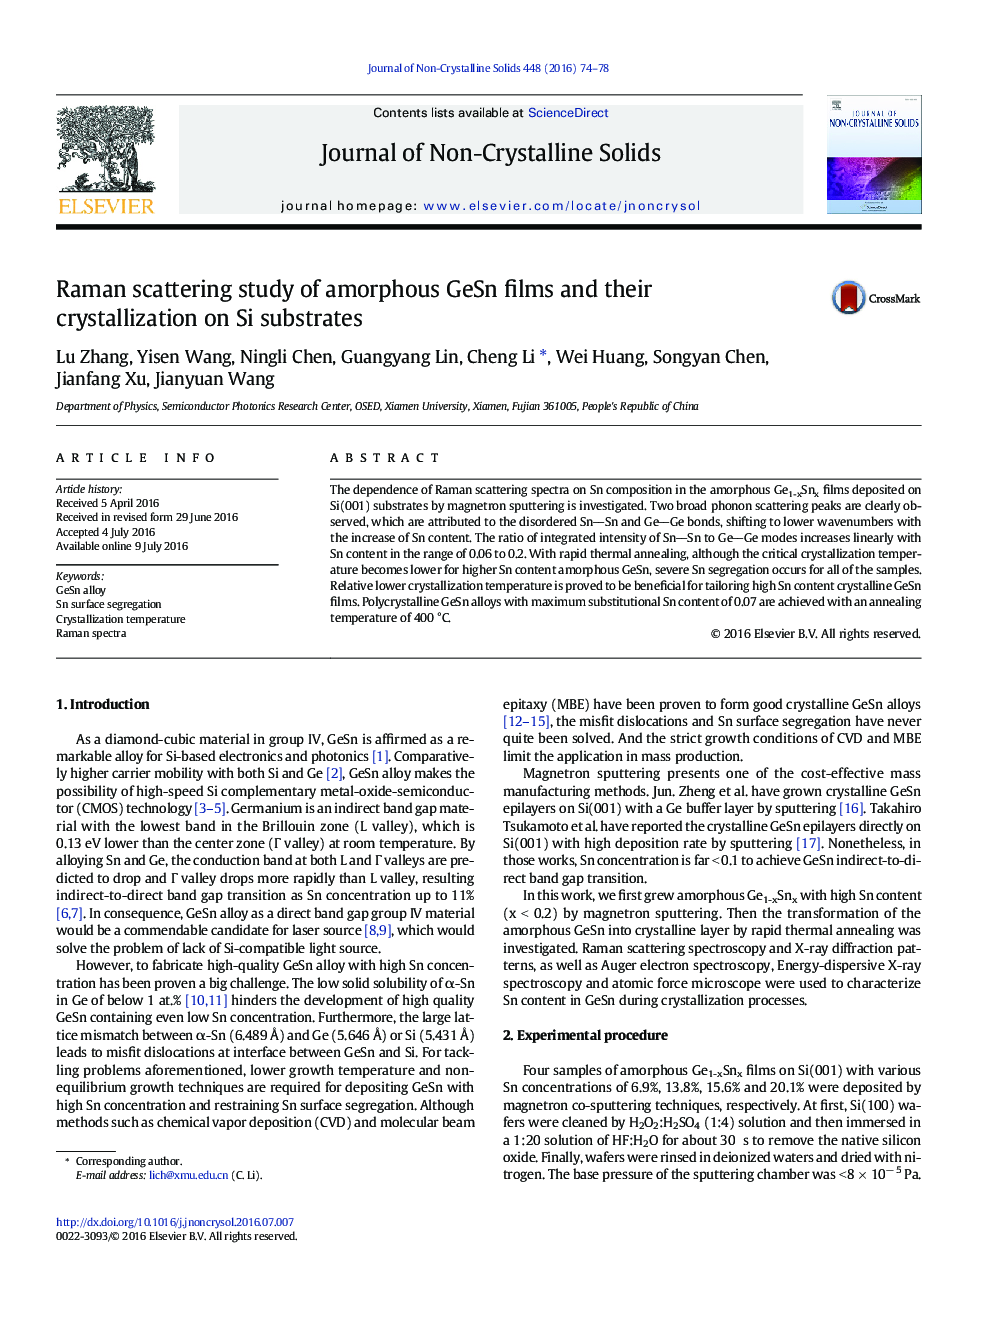 Raman scattering study of amorphous GeSn films and their crystallization on Si substrates